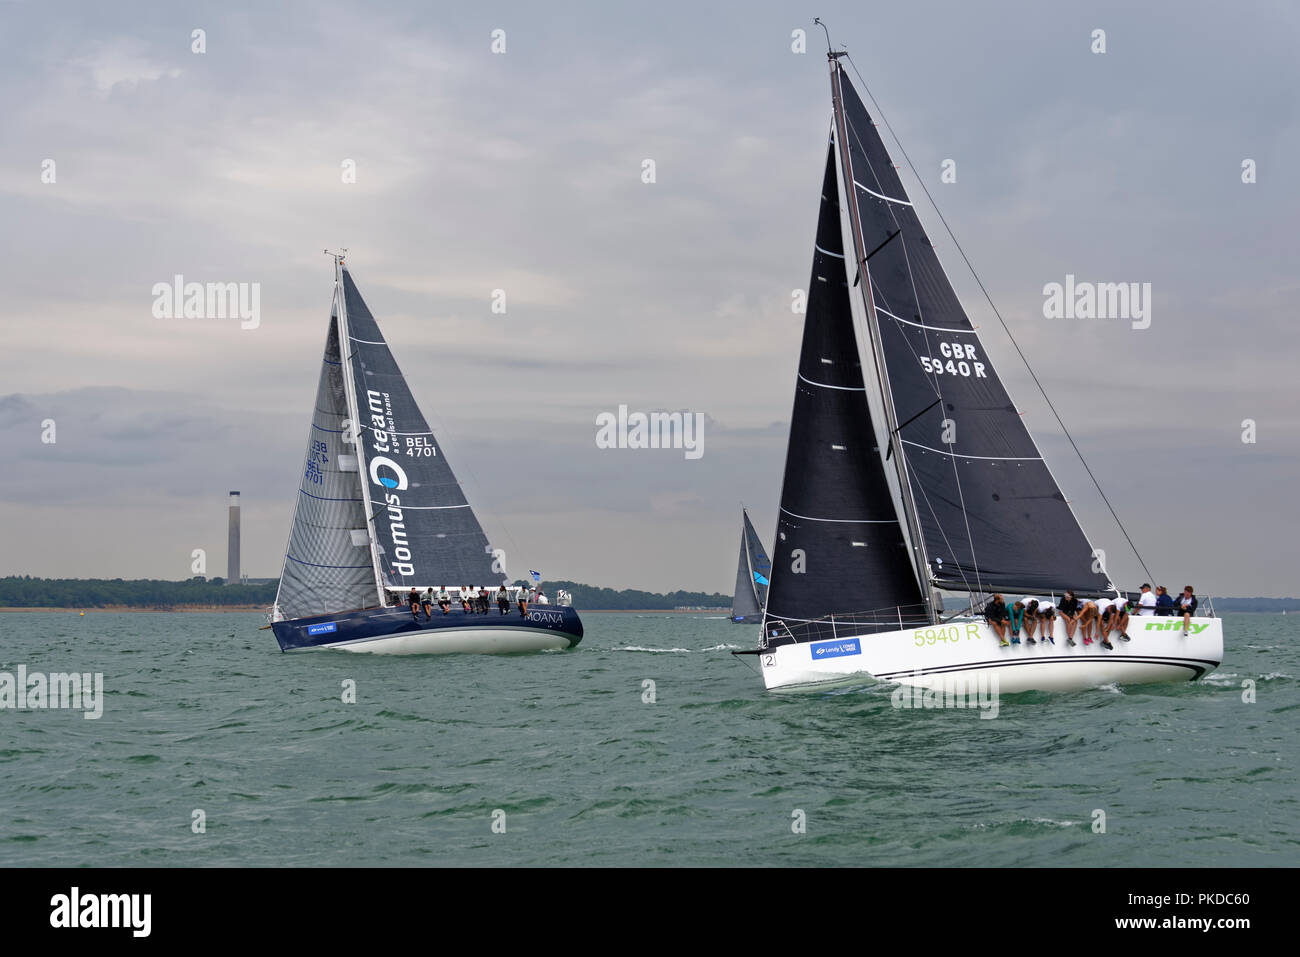 Close competition during the Cowes Week Regatta with these two yachts the Belgian Moana and British Nifty neck and neck in the Solent Stock Photo